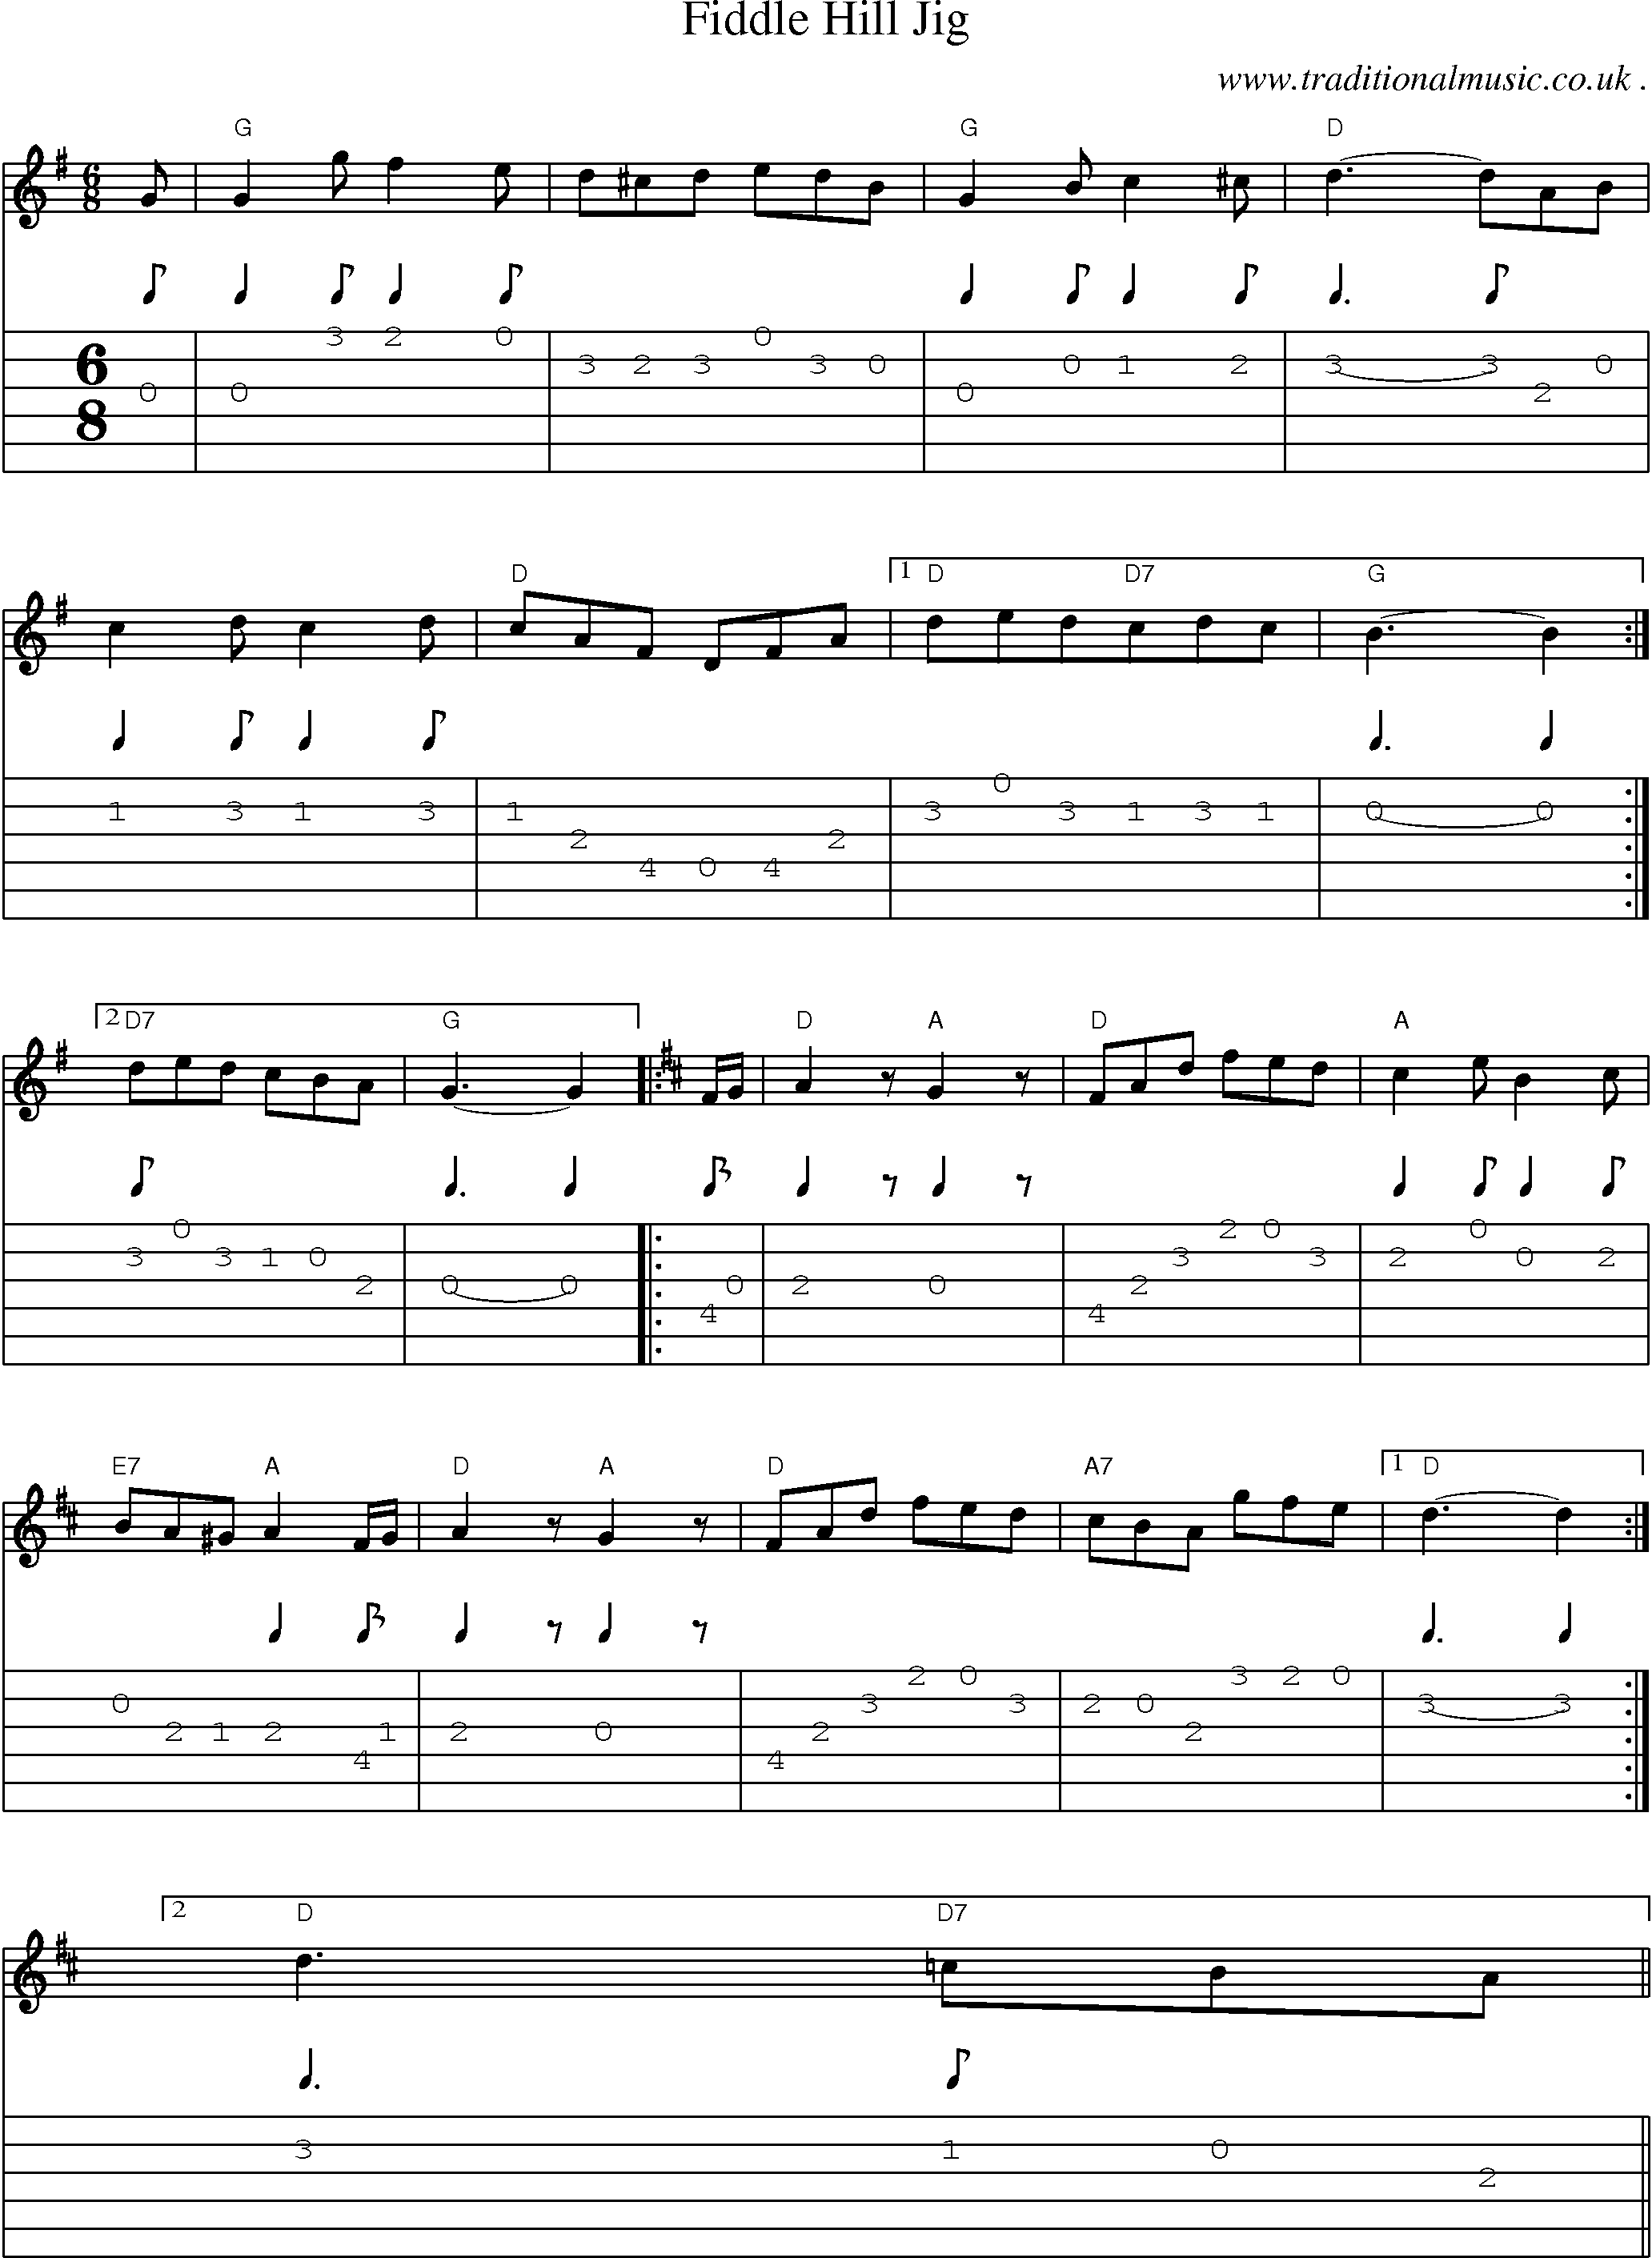 Sheet-Music and Guitar Tabs for Fiddle Hill Jig